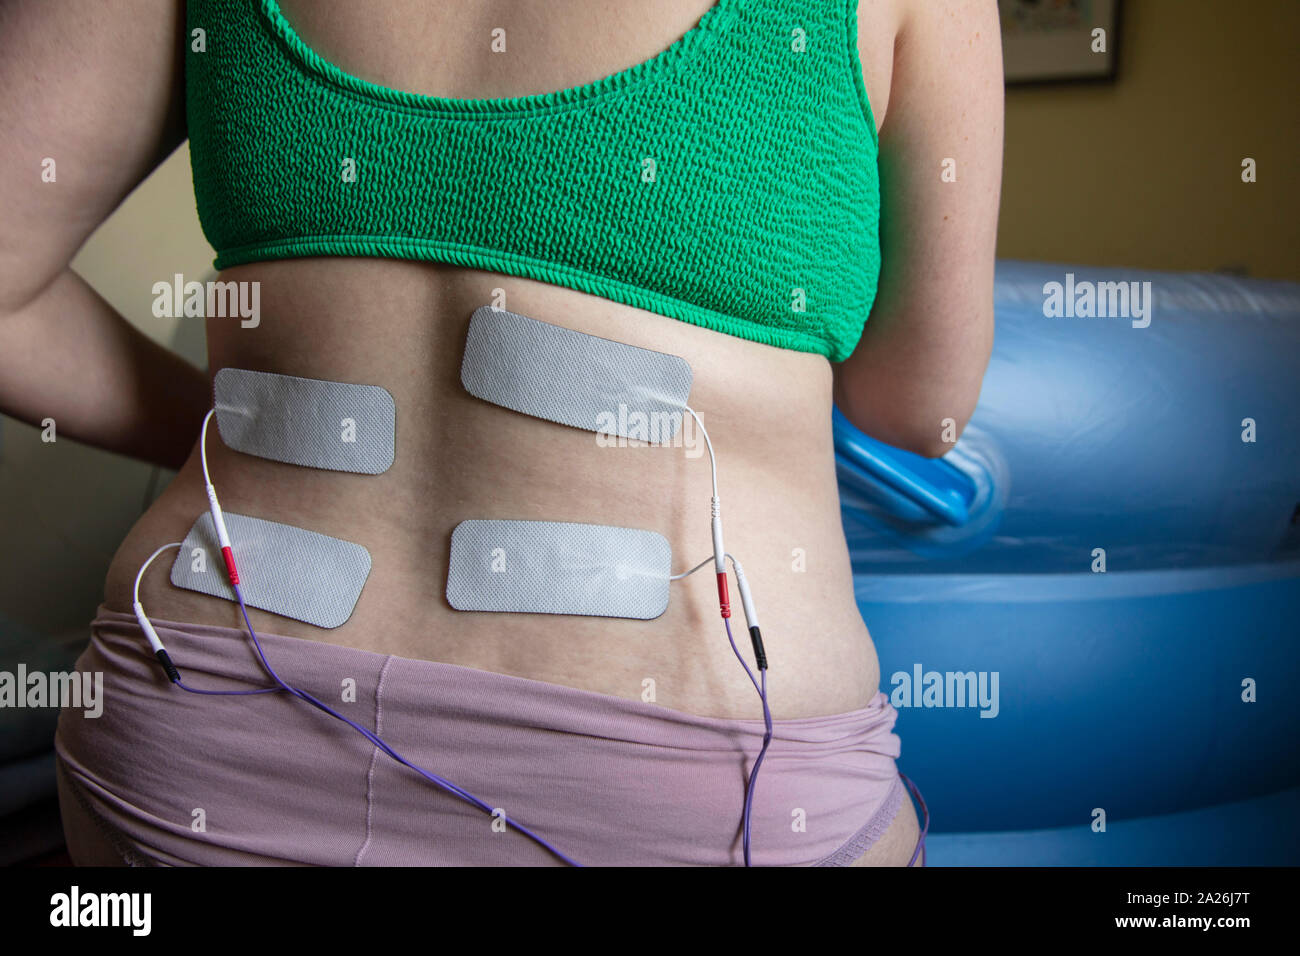 A pregnant woman in labour wearing a tens machine as pain relief Stock Photo